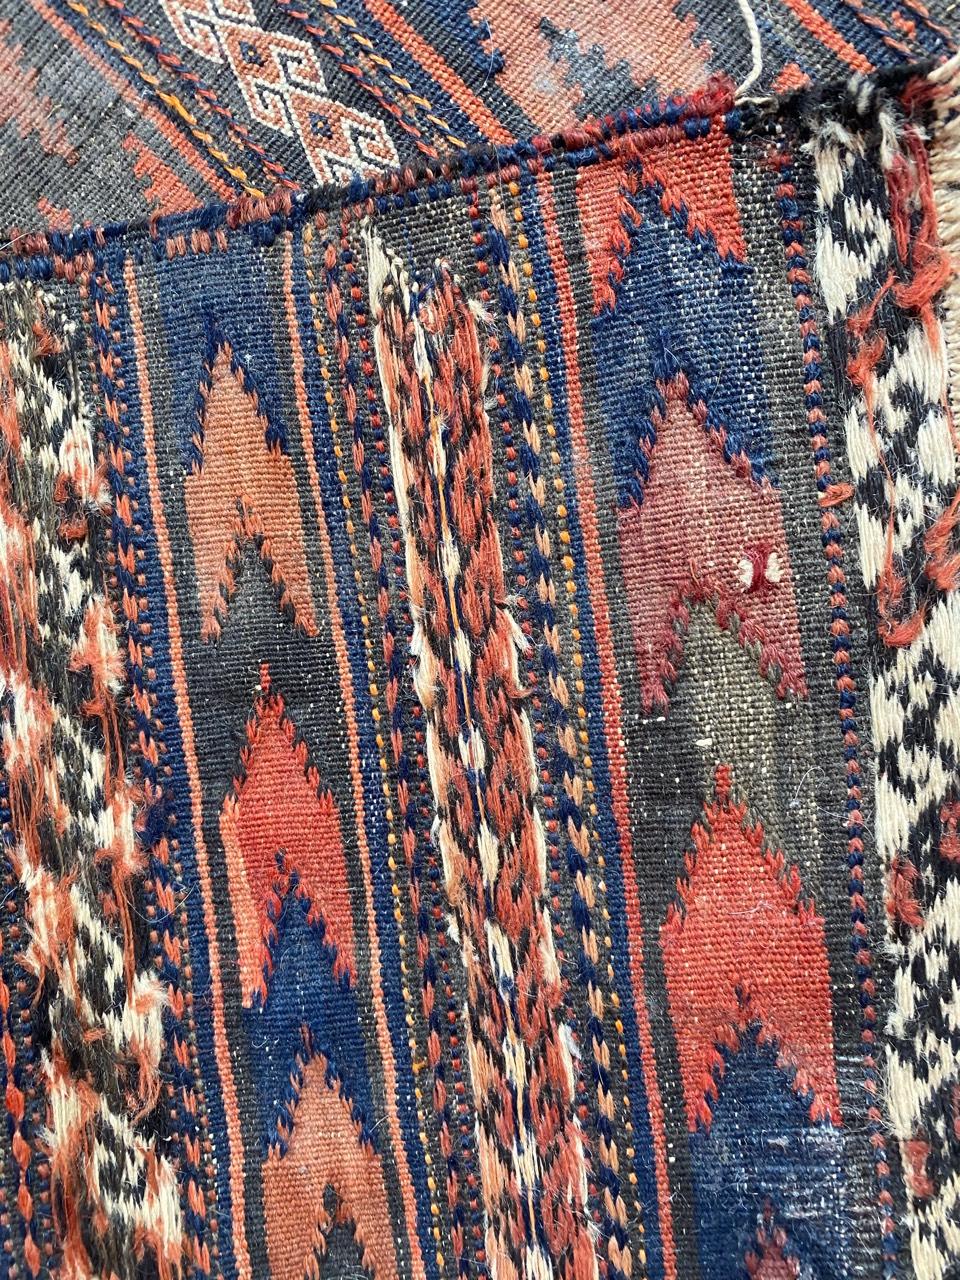 Beautiful midcentury Kilim with a tribal design and nice colors with red, blue, orange and brown, entirely handwoven with wool on wool.